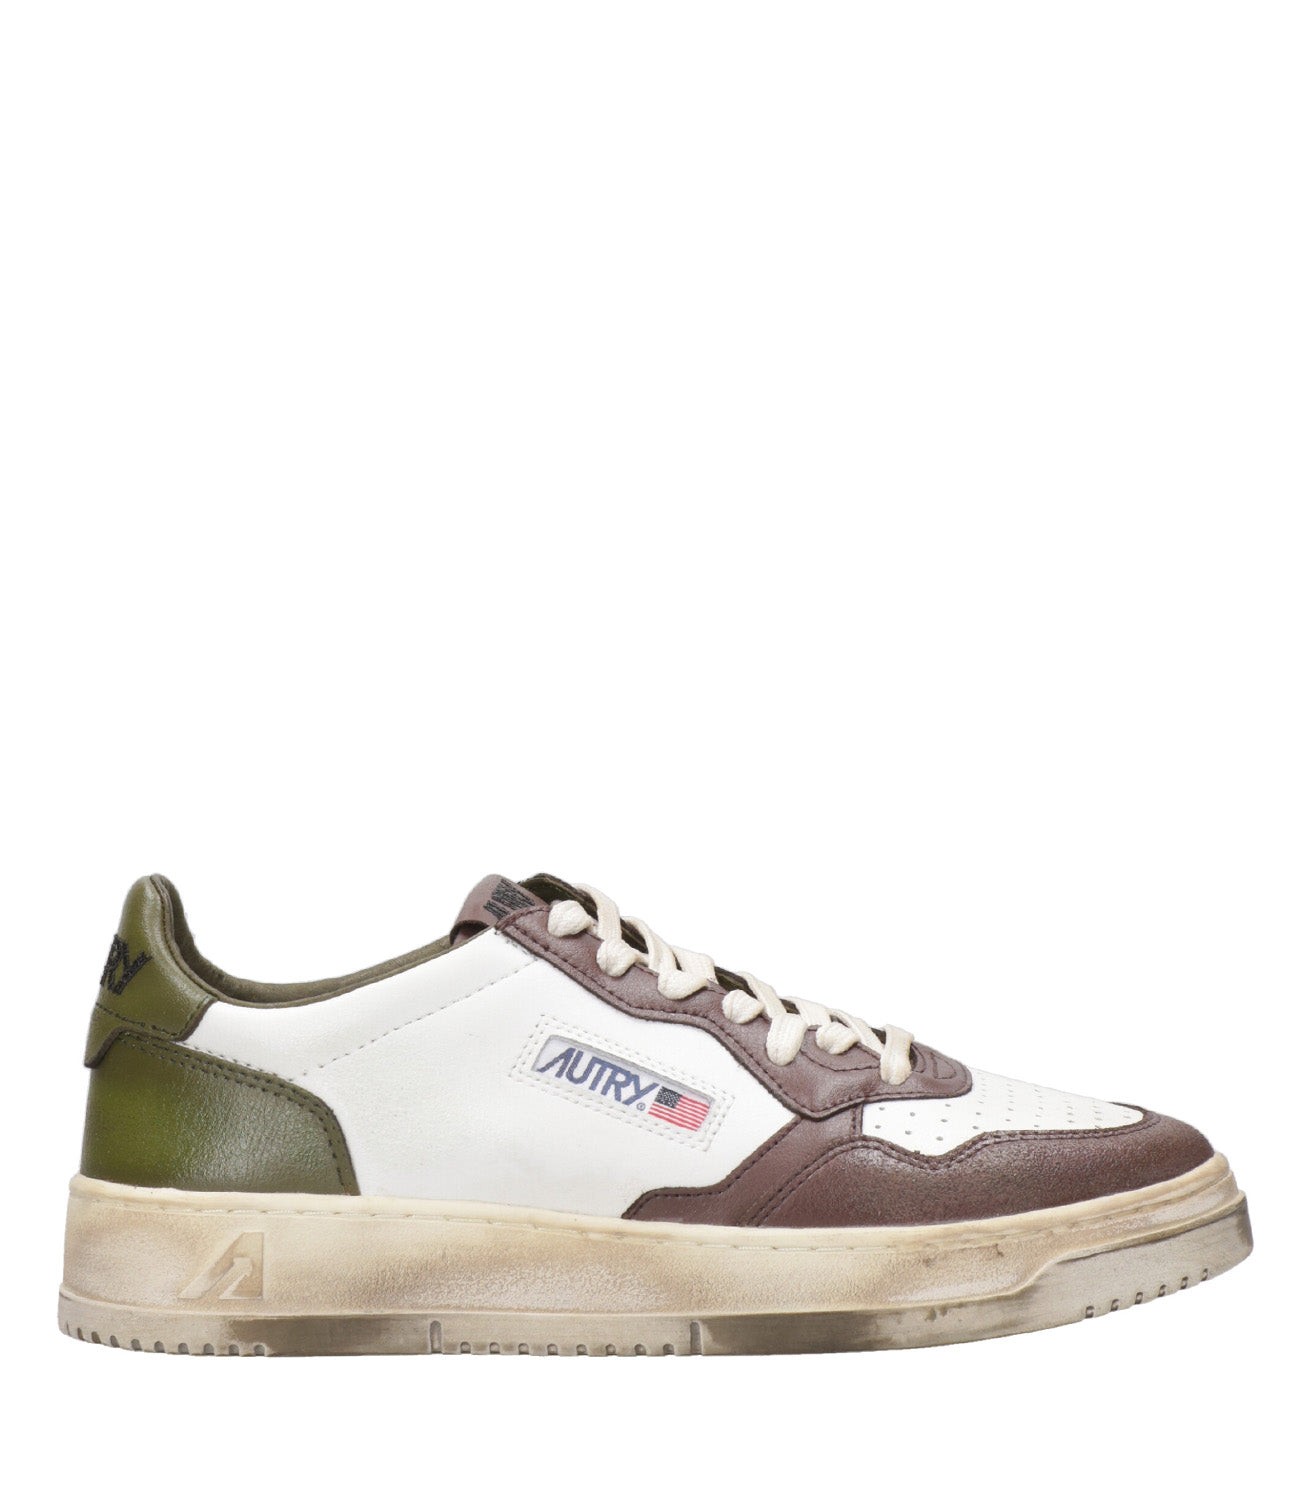 Autry | Sup Vint Low Brown and Green Sneakers